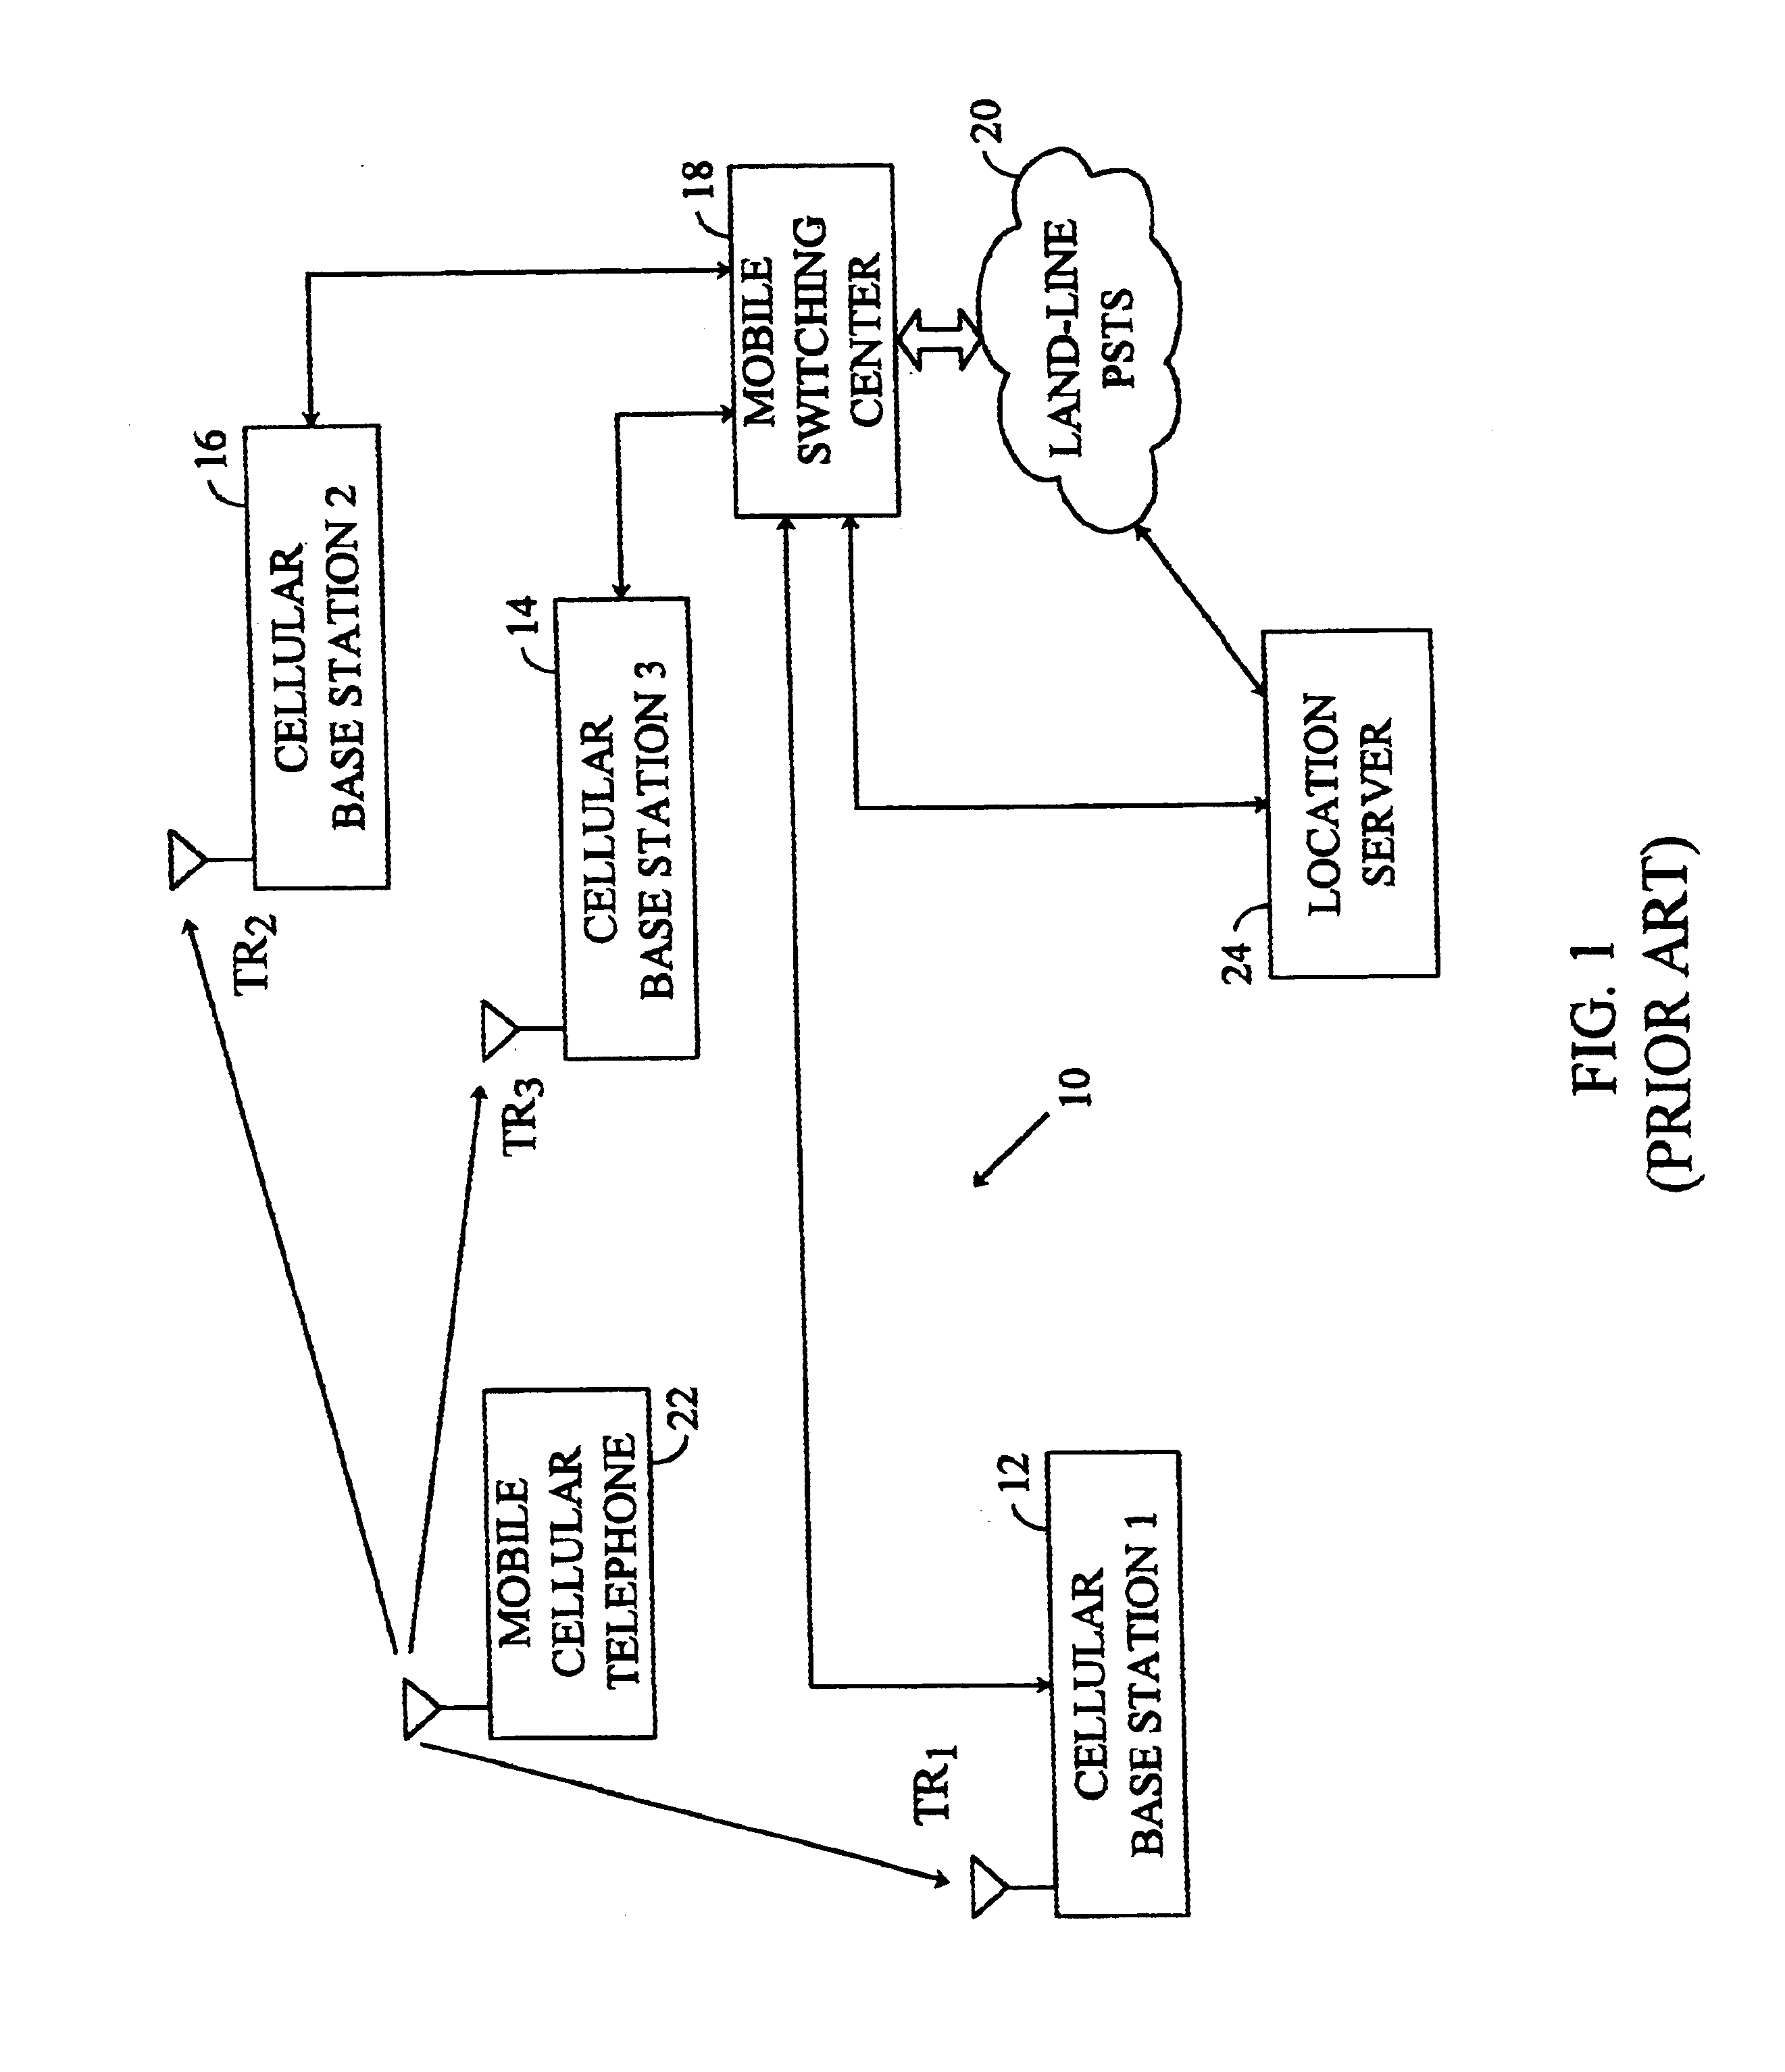 Methods and apparatuses for using mobile GPS receivers to synchronize basestations in cellular networks